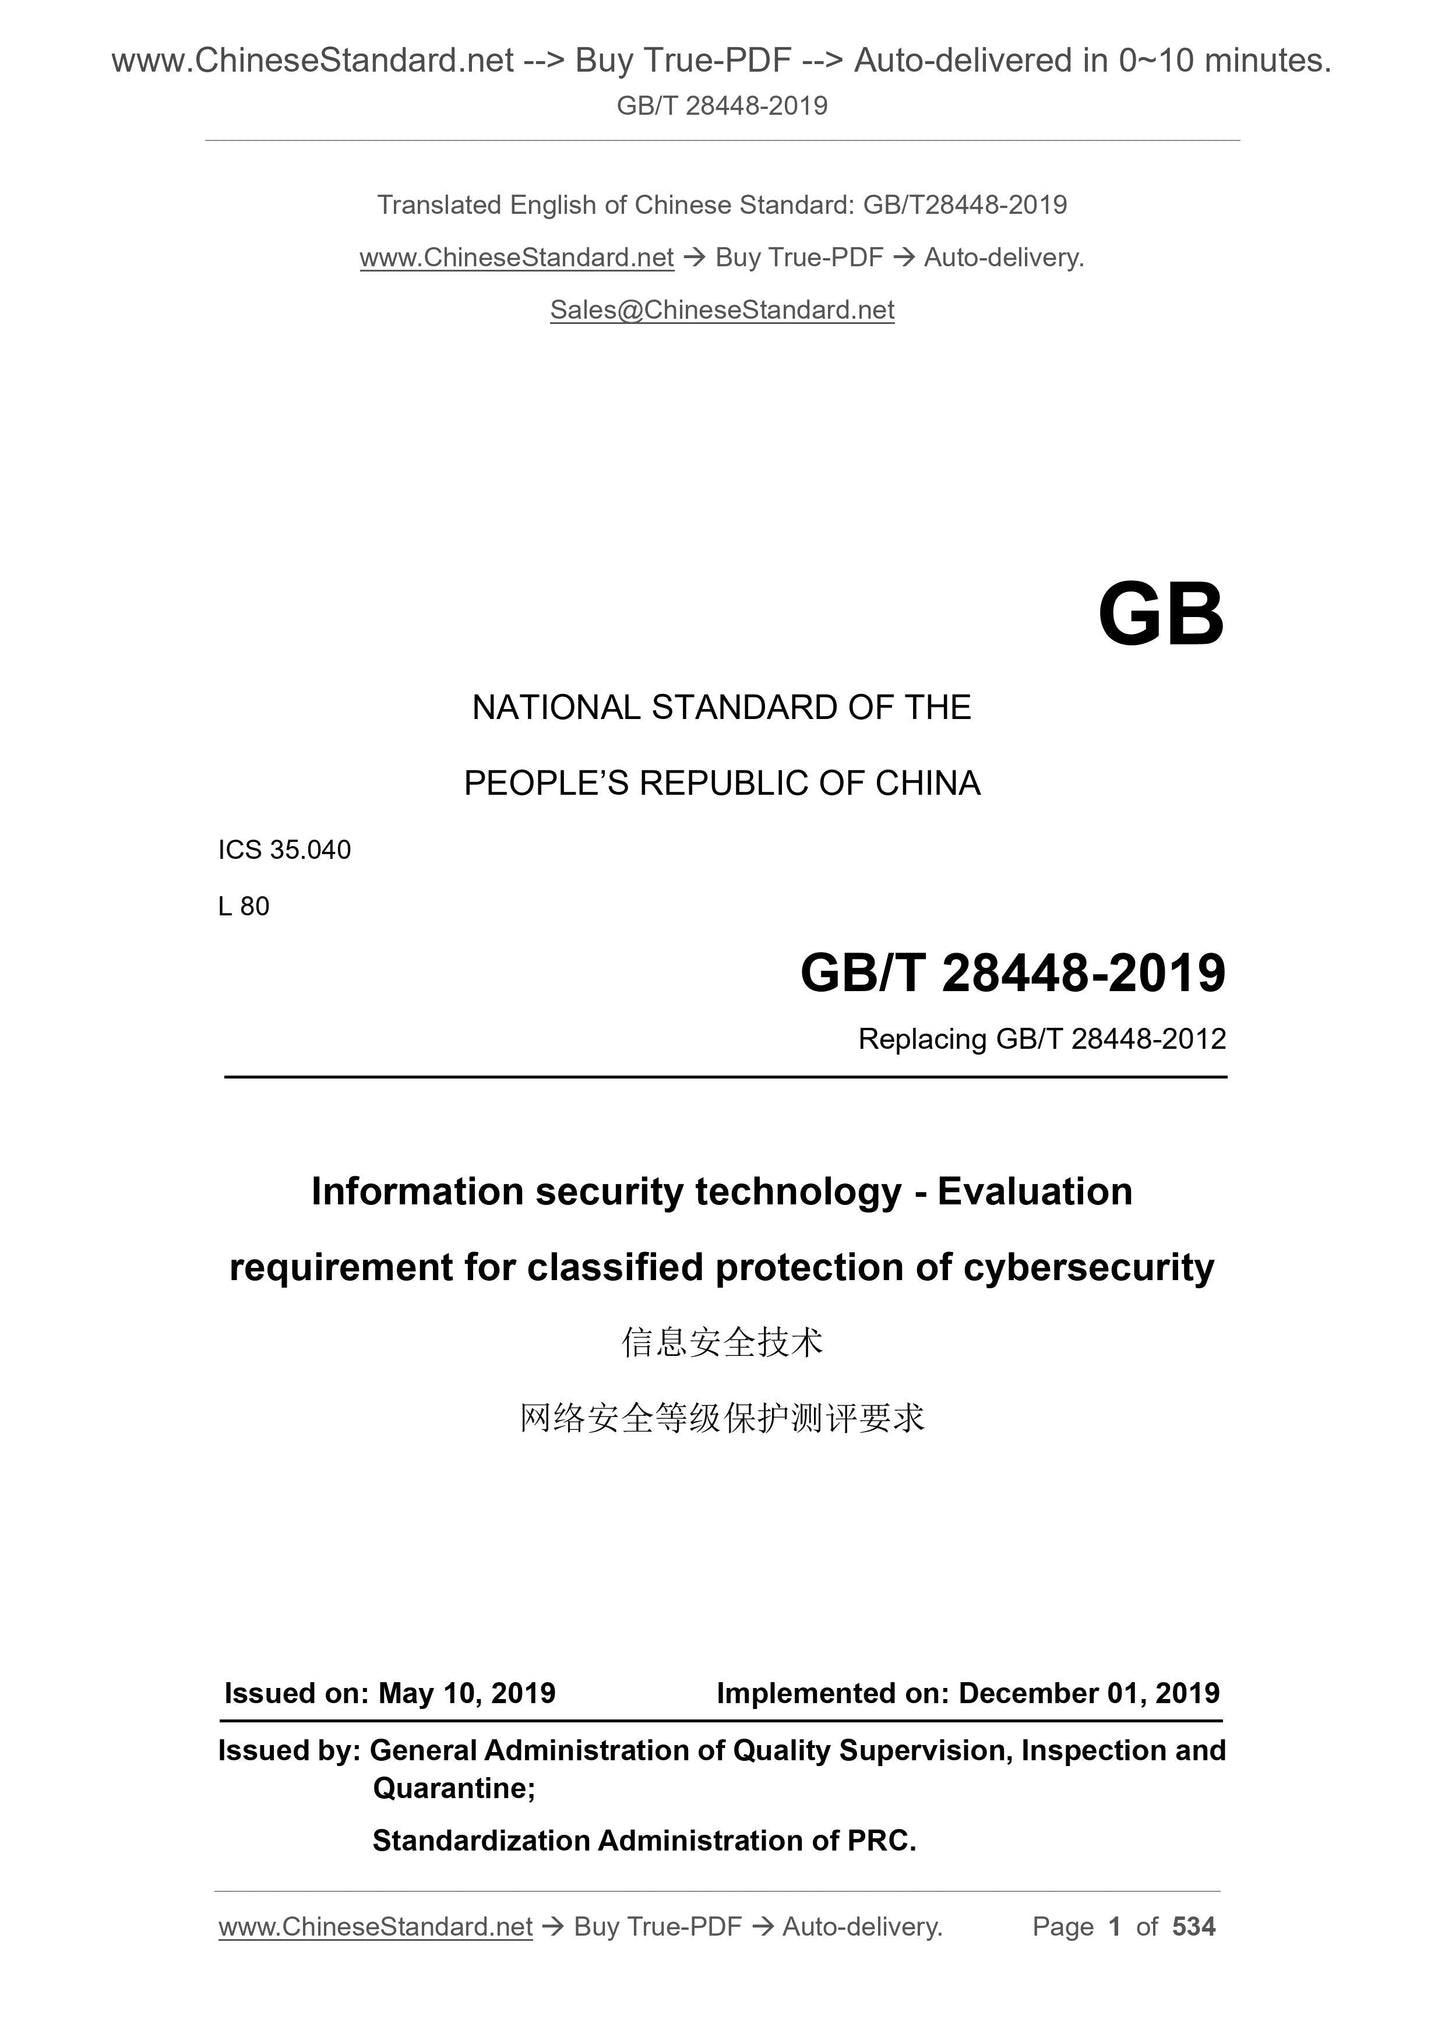 GB/T 28448-2019 Page 1